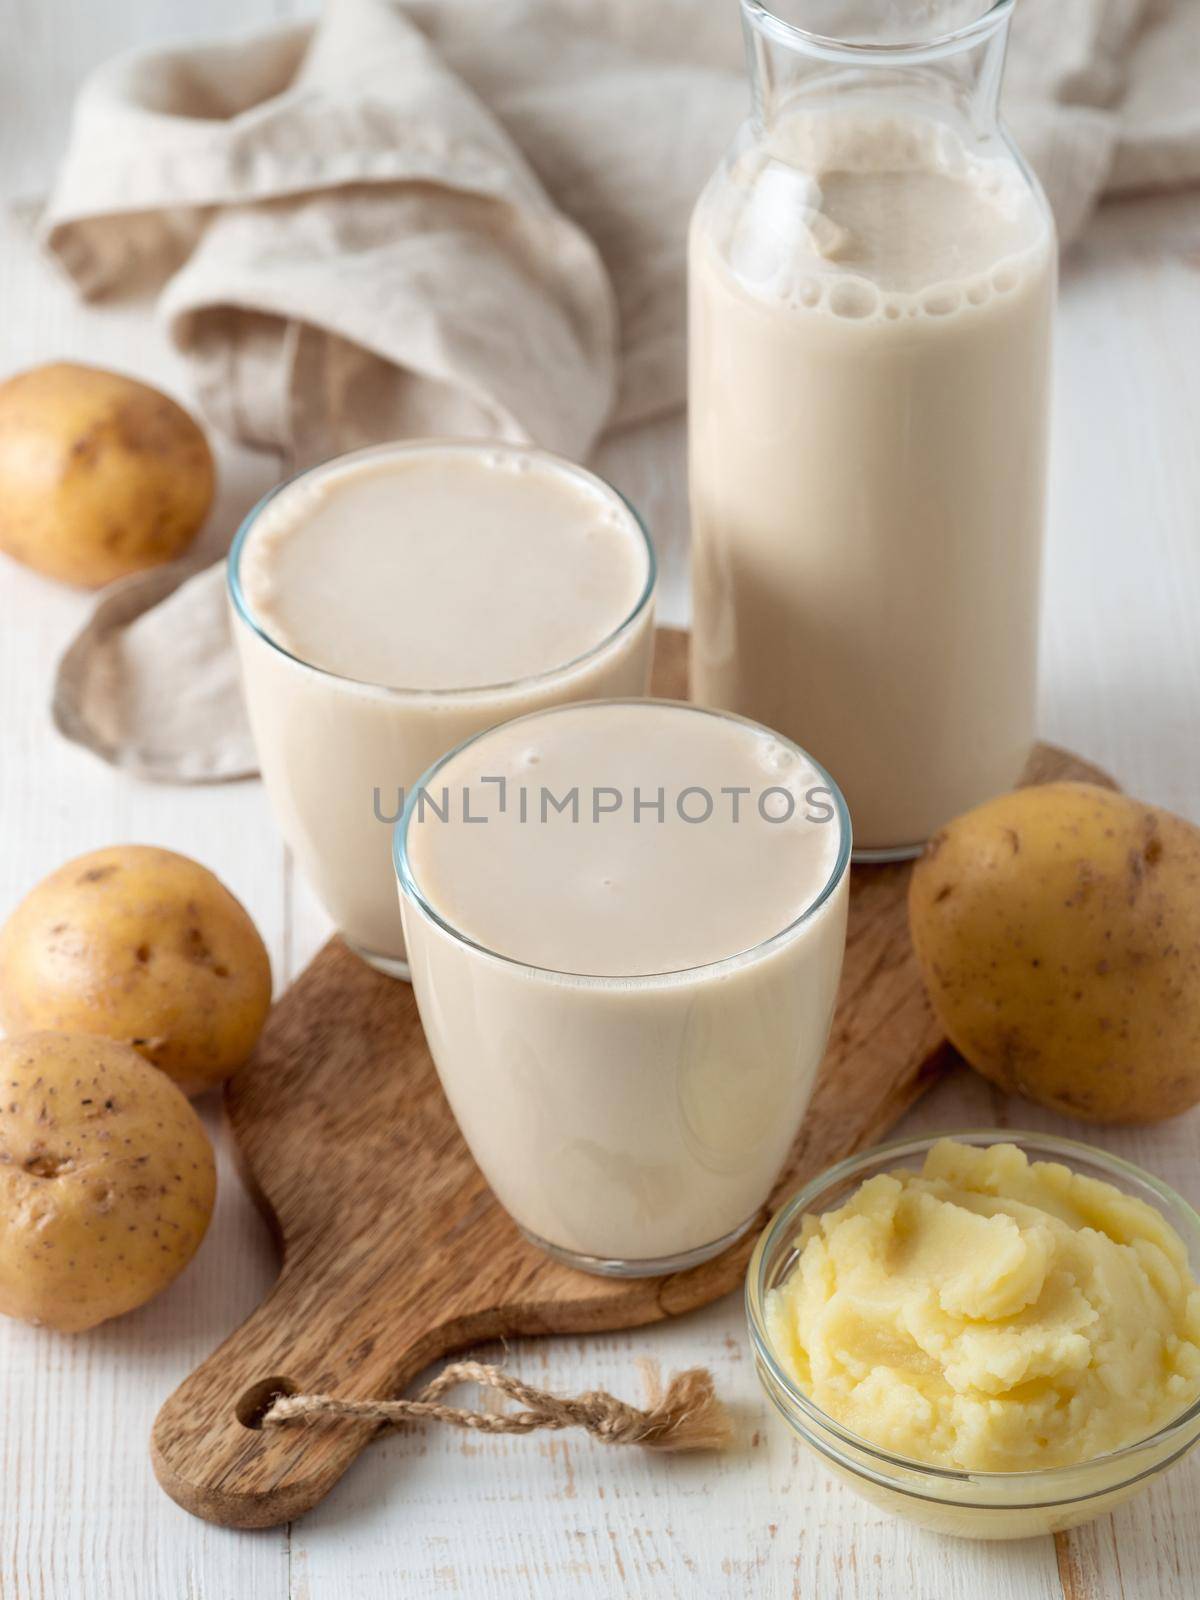 Potato milk in glasses on white wooden background. Pouring vegan milk in glass, with potato puree and potato tubers on background. Copy space. Home made potato milk made from boiled potatoes